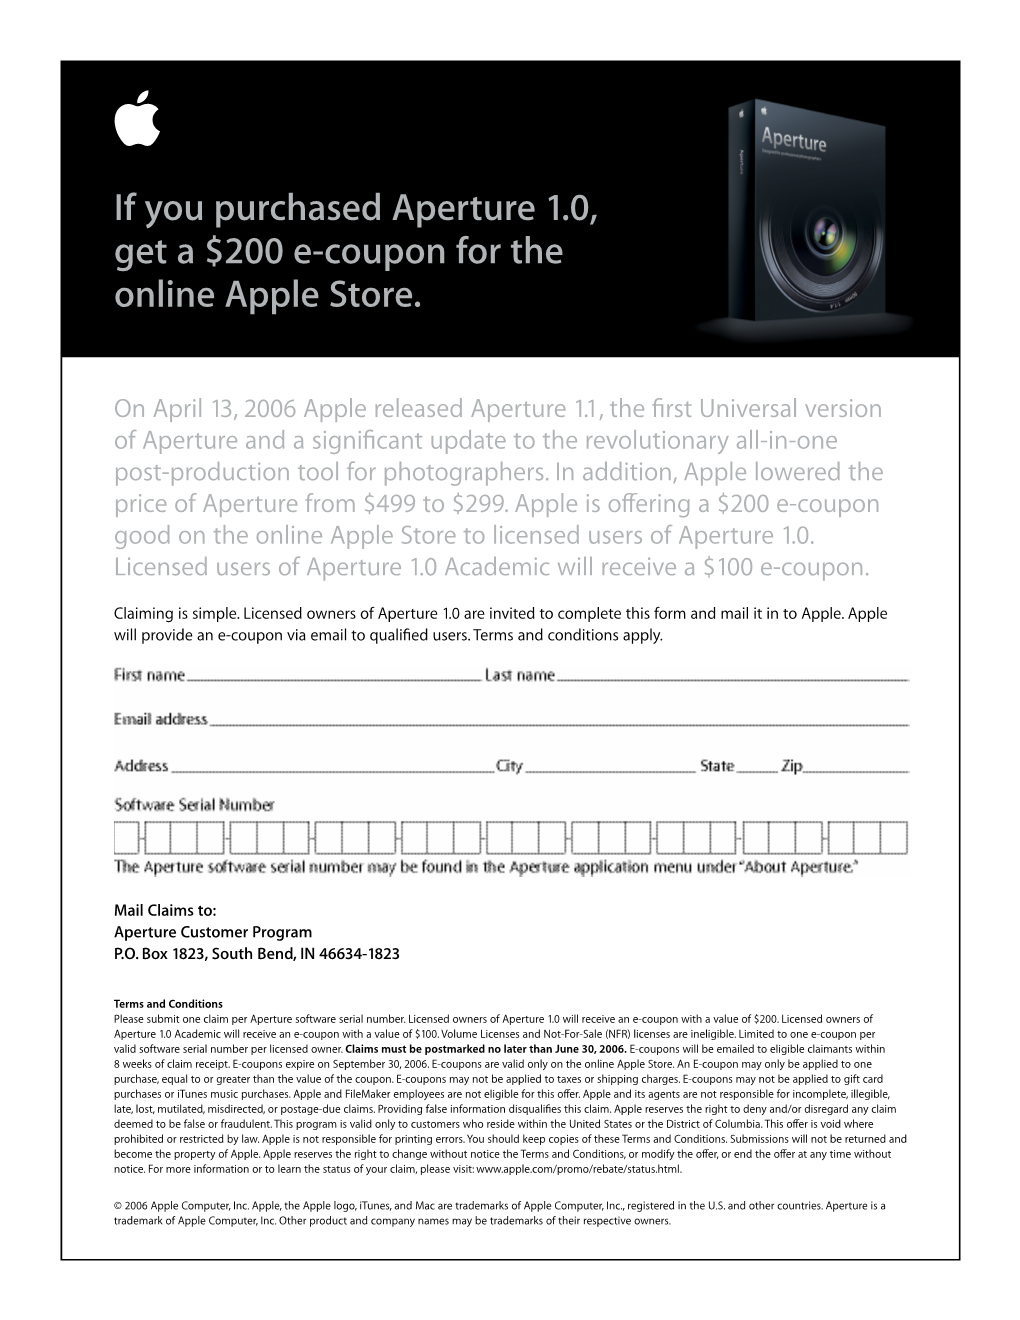 If You Purchased Aperture 1.0, Get a $200 E-Coupon for the Online Apple Store